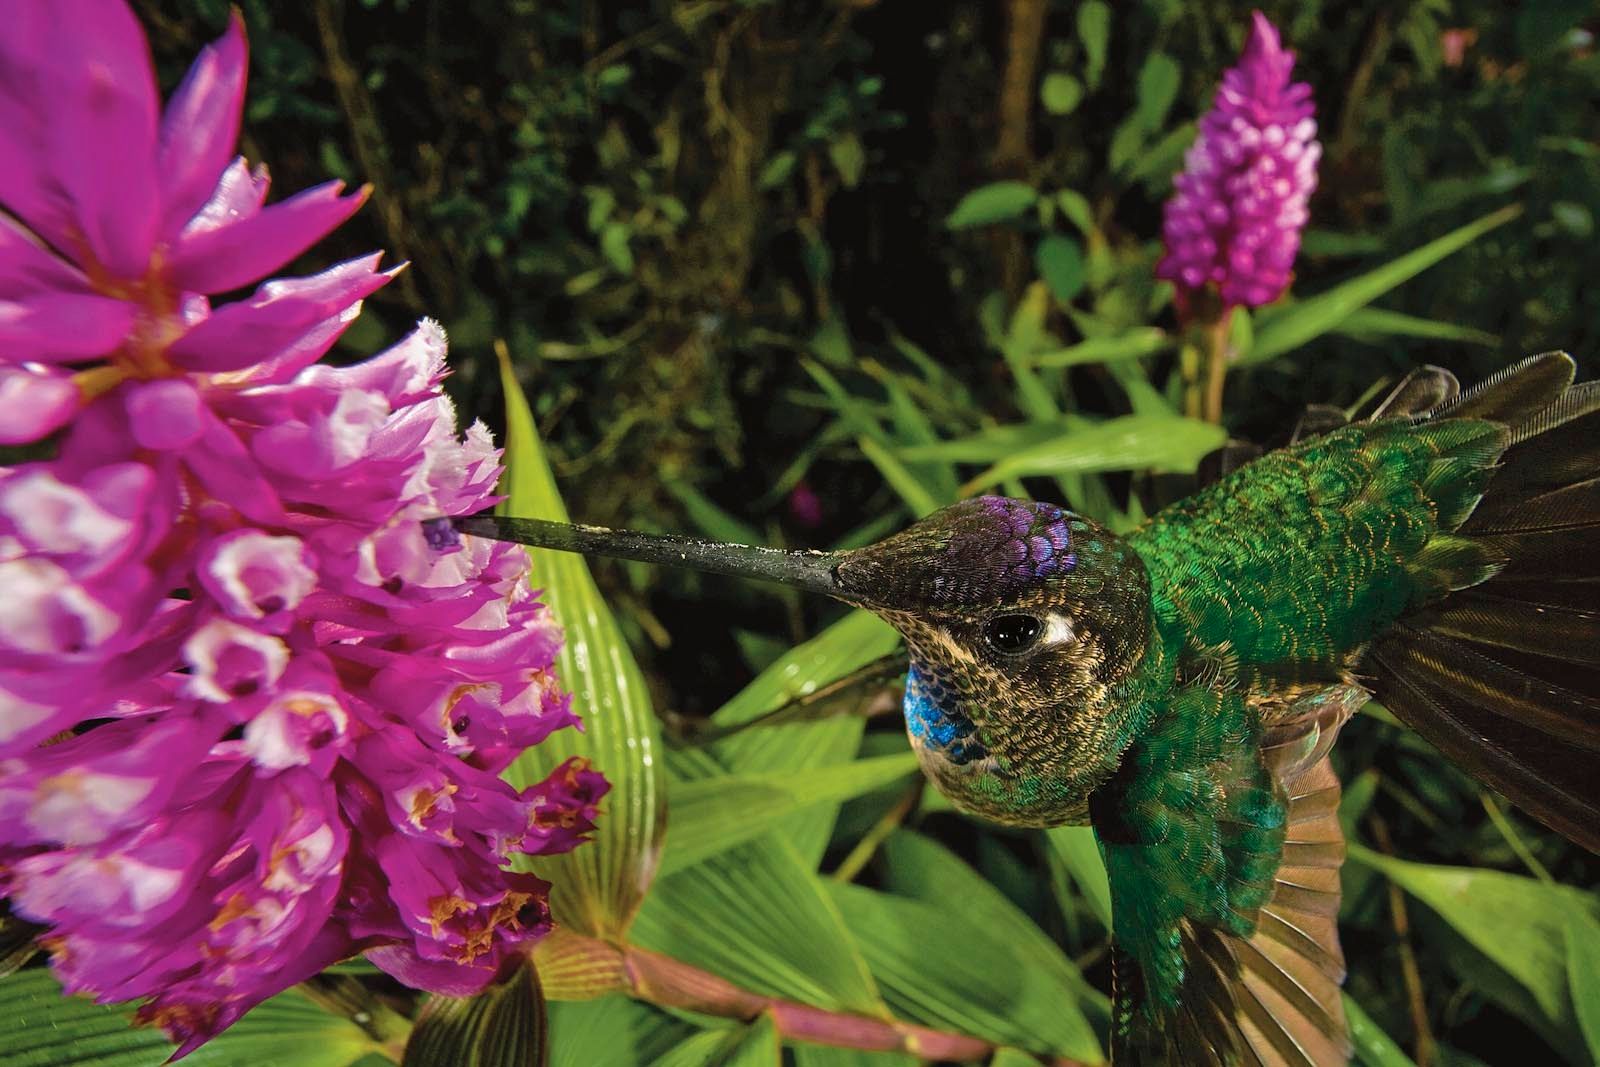 Deceptive beauties - orchids and their pollinators